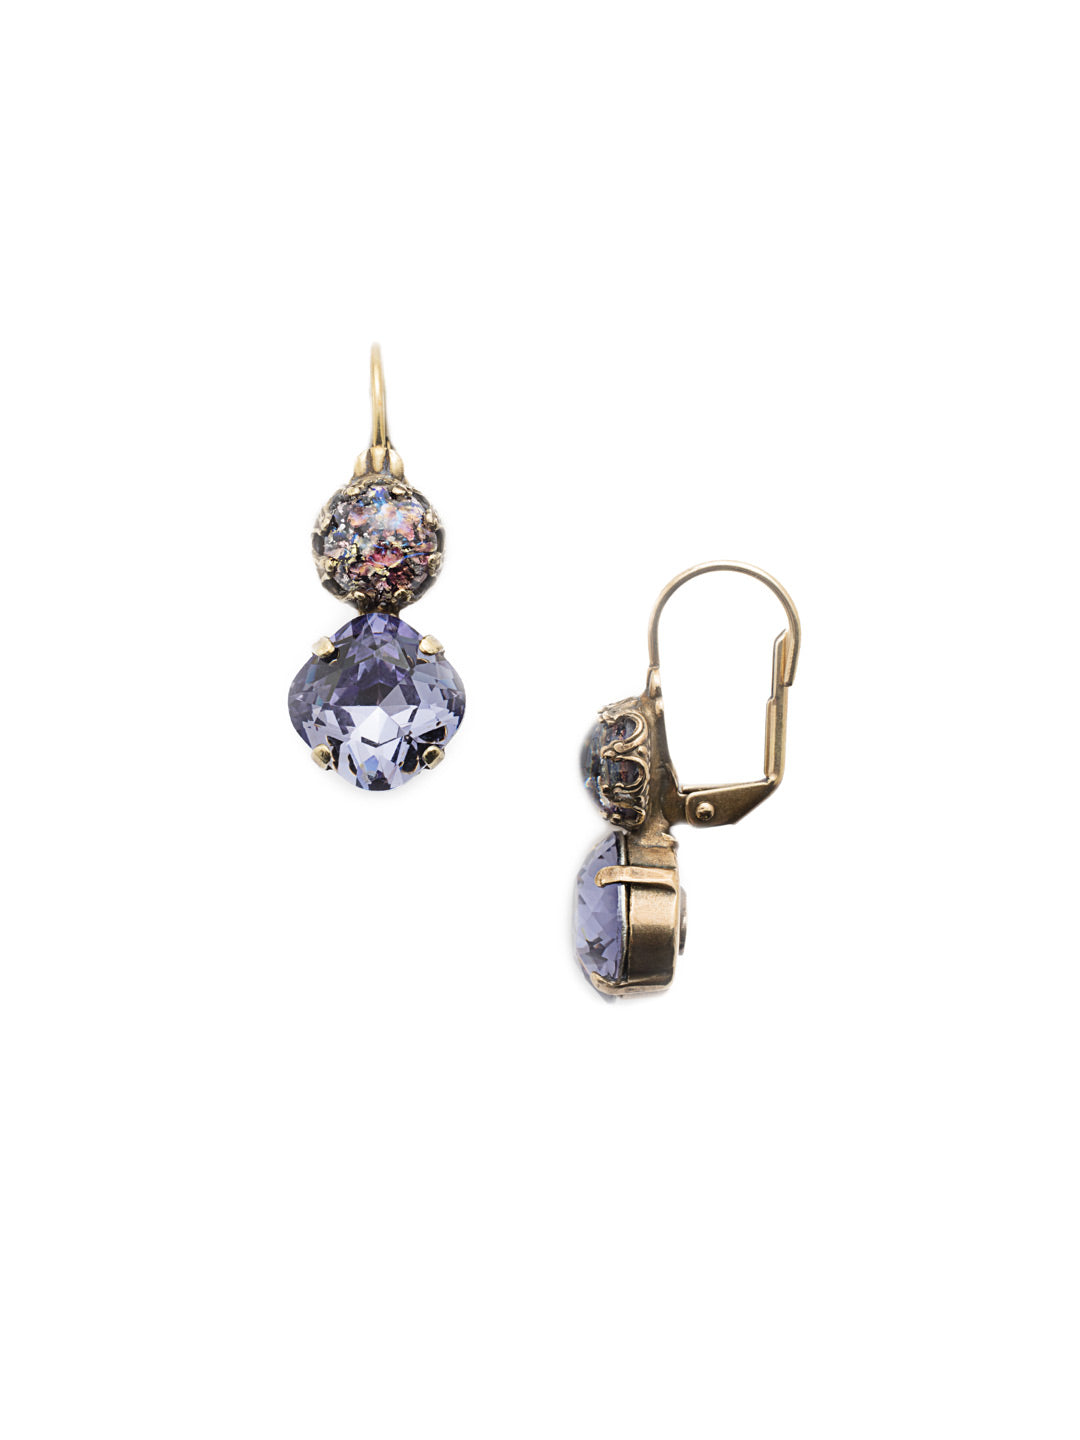 Caterina Dangle Earring - EES11AGDCS - Our Caterina French Wire Dangle Earrings start with a classic pearl, joined by an opaque cushion-cut crystal that will take your ensemble up a notch. From Sorrelli's Duchess collection in our Antique Gold-tone finish.